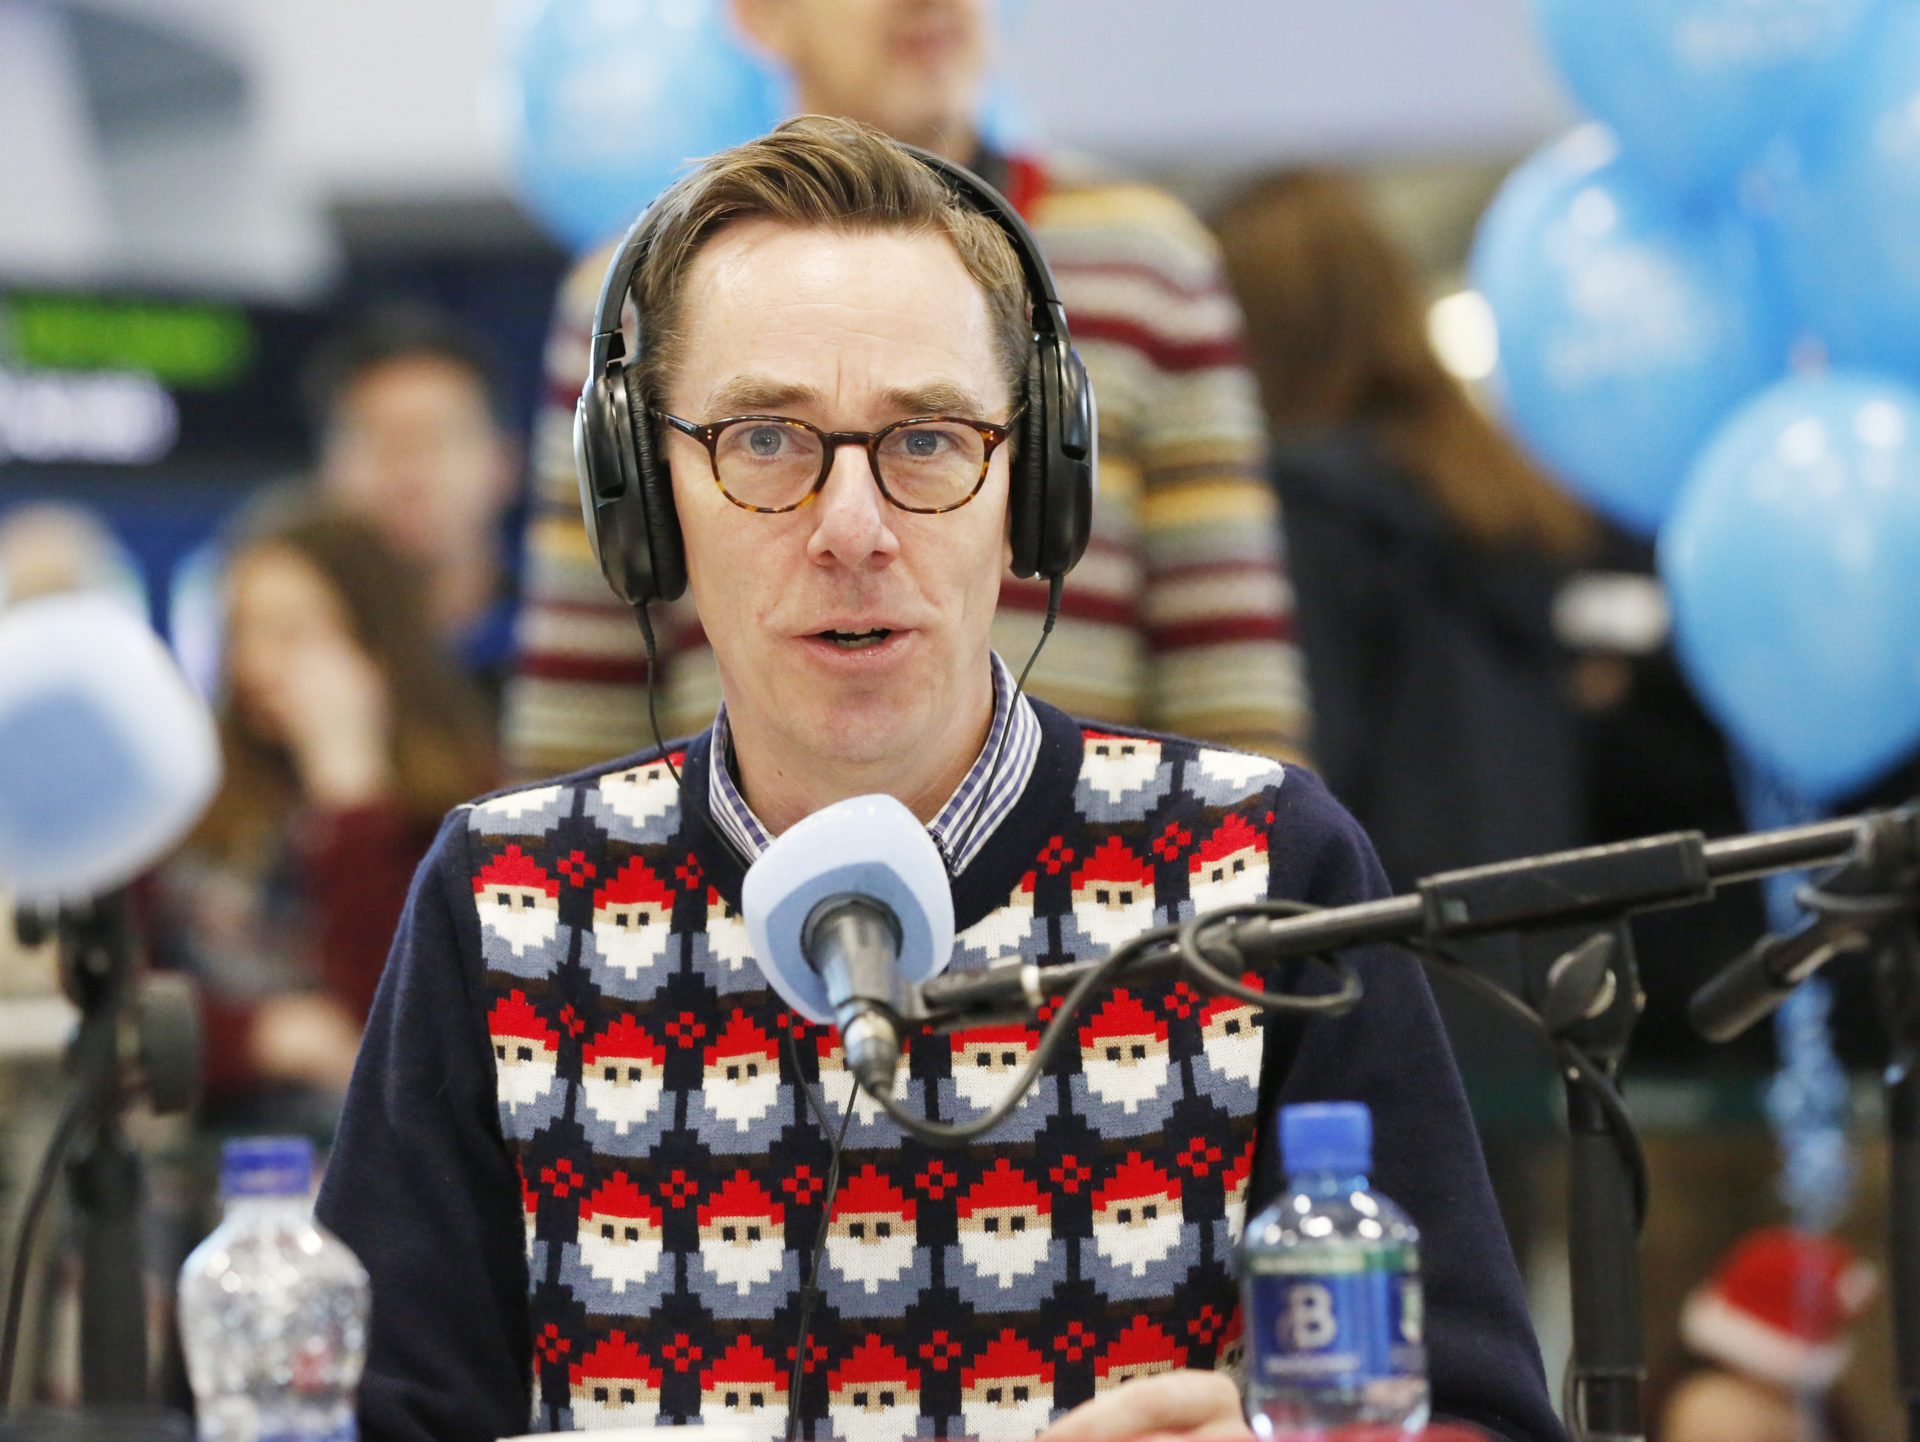 Ryan Tubridy presenting his radio show at Terminal 2 in Dublin Airport in December 2019